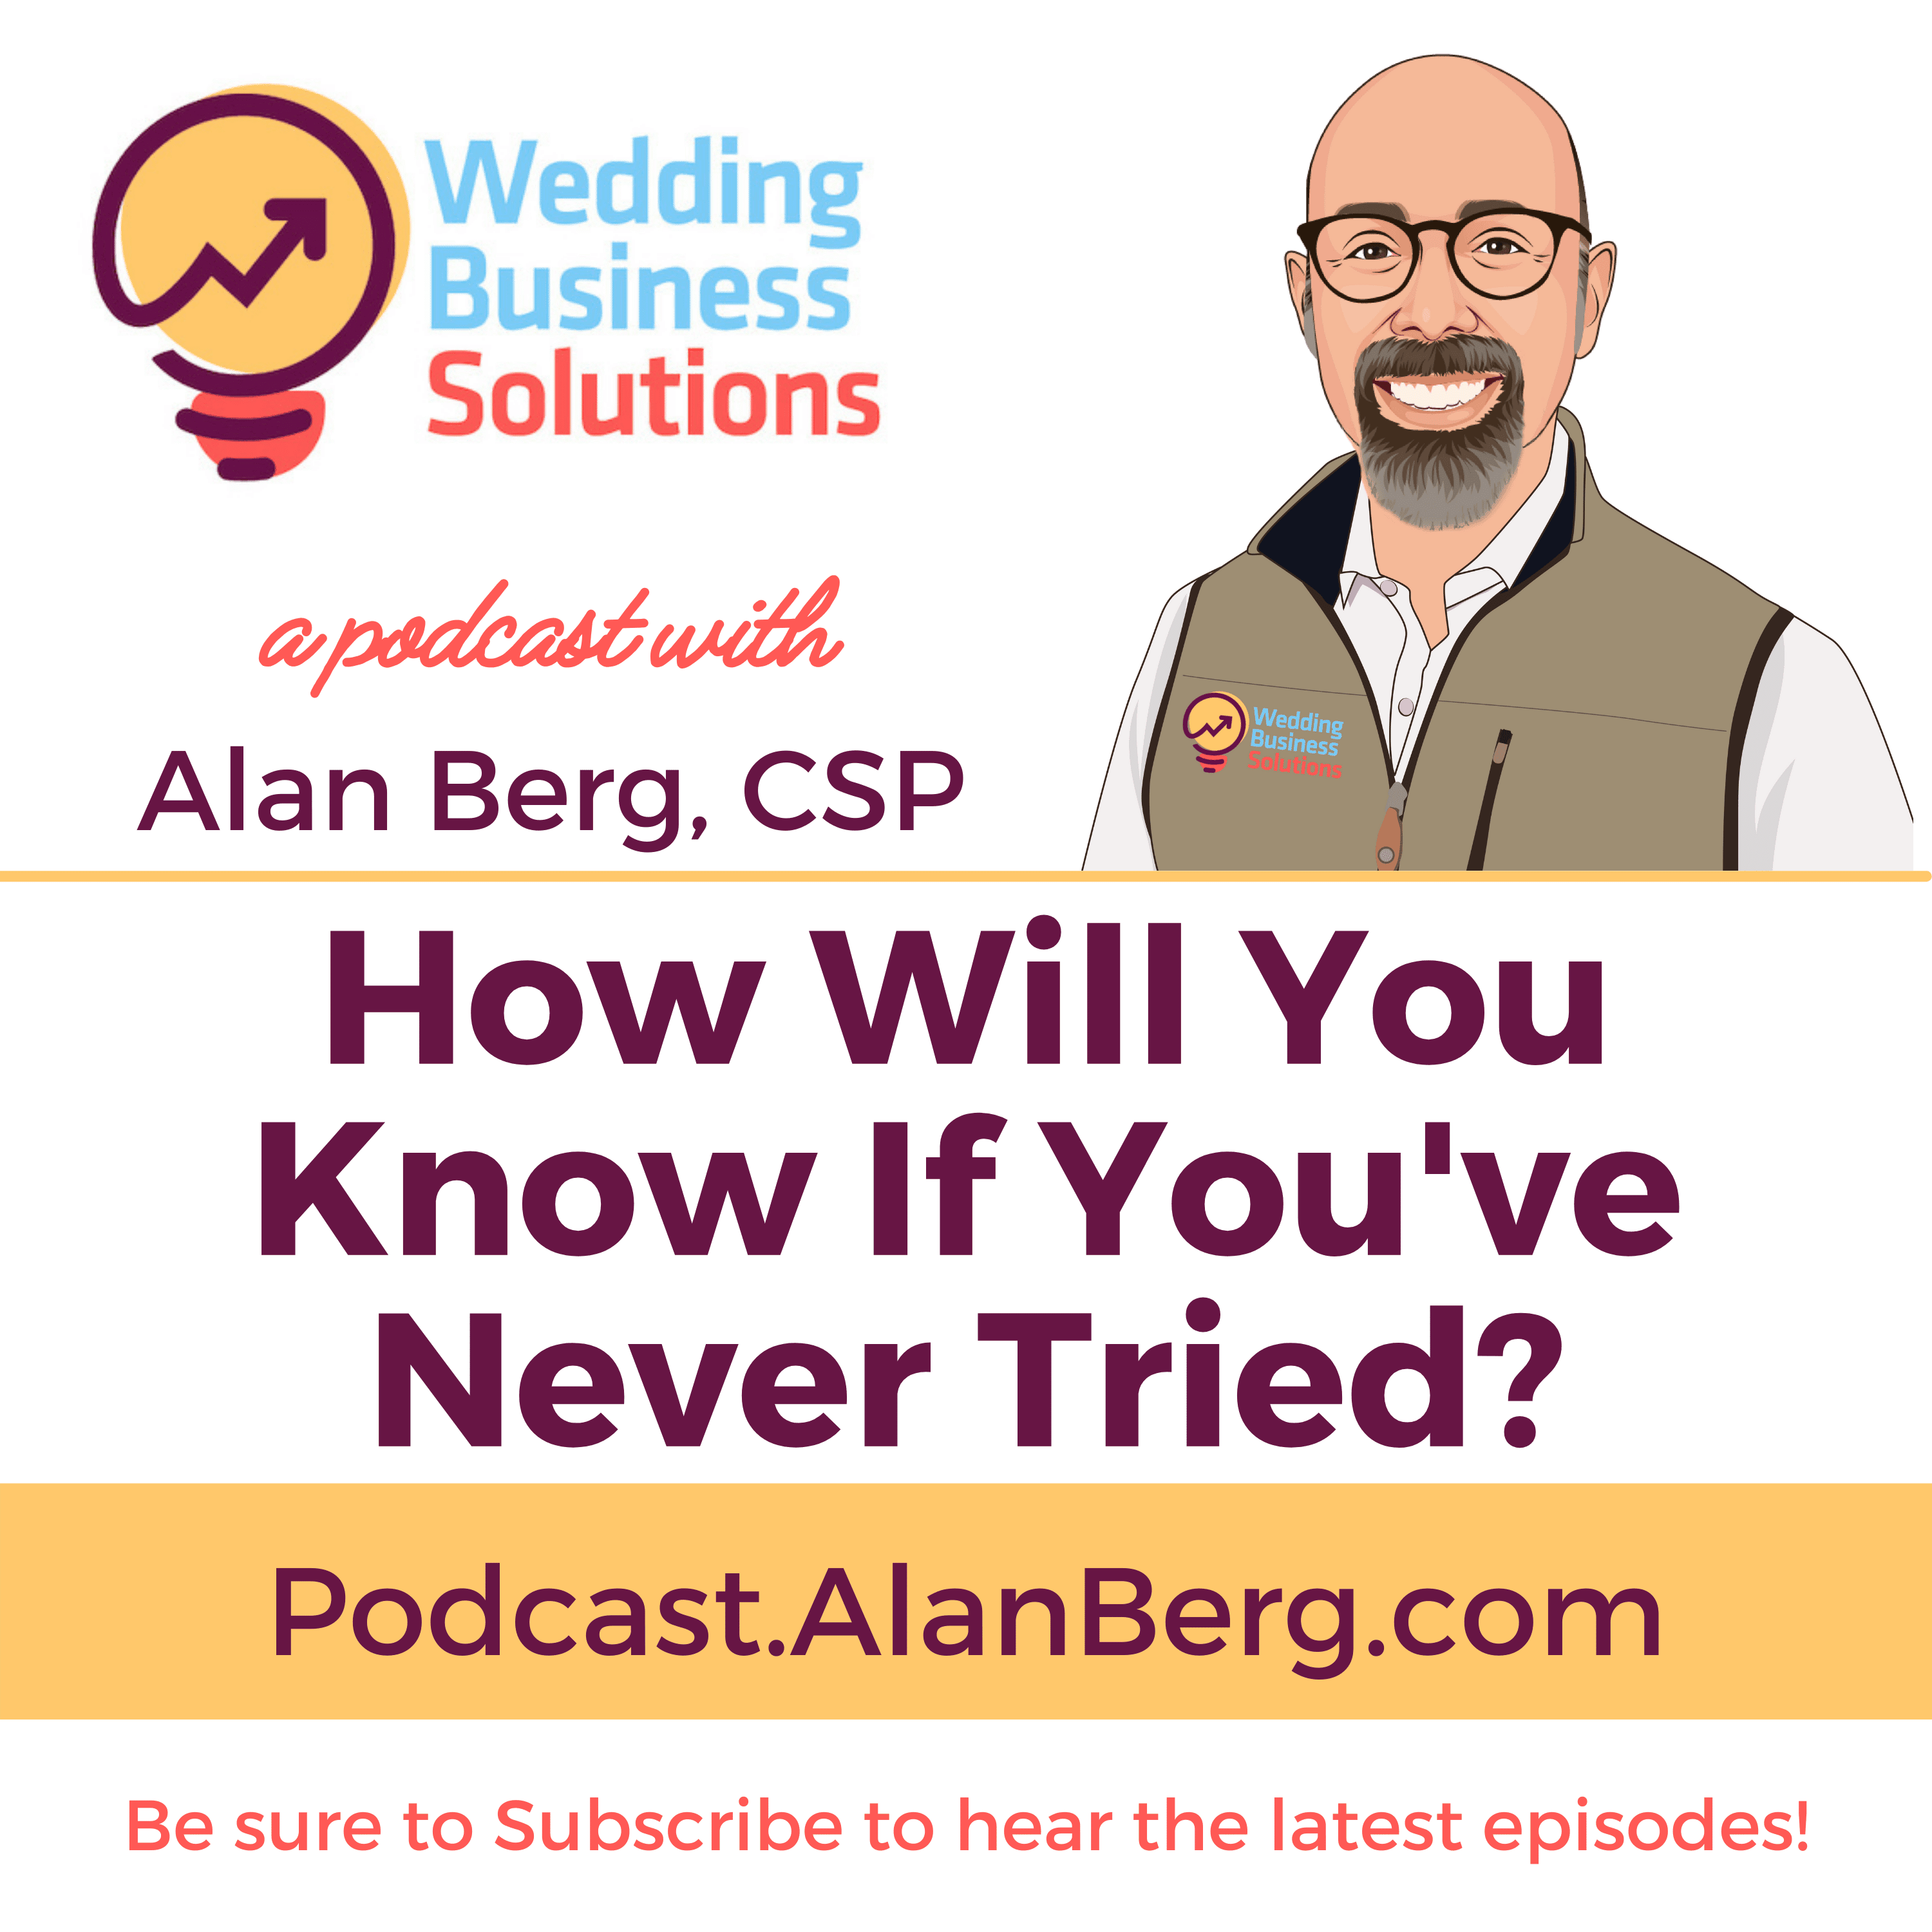 How Will You Know If You've Never Tried? Alan Berg CSP, Wedding Business Solutions Podcast